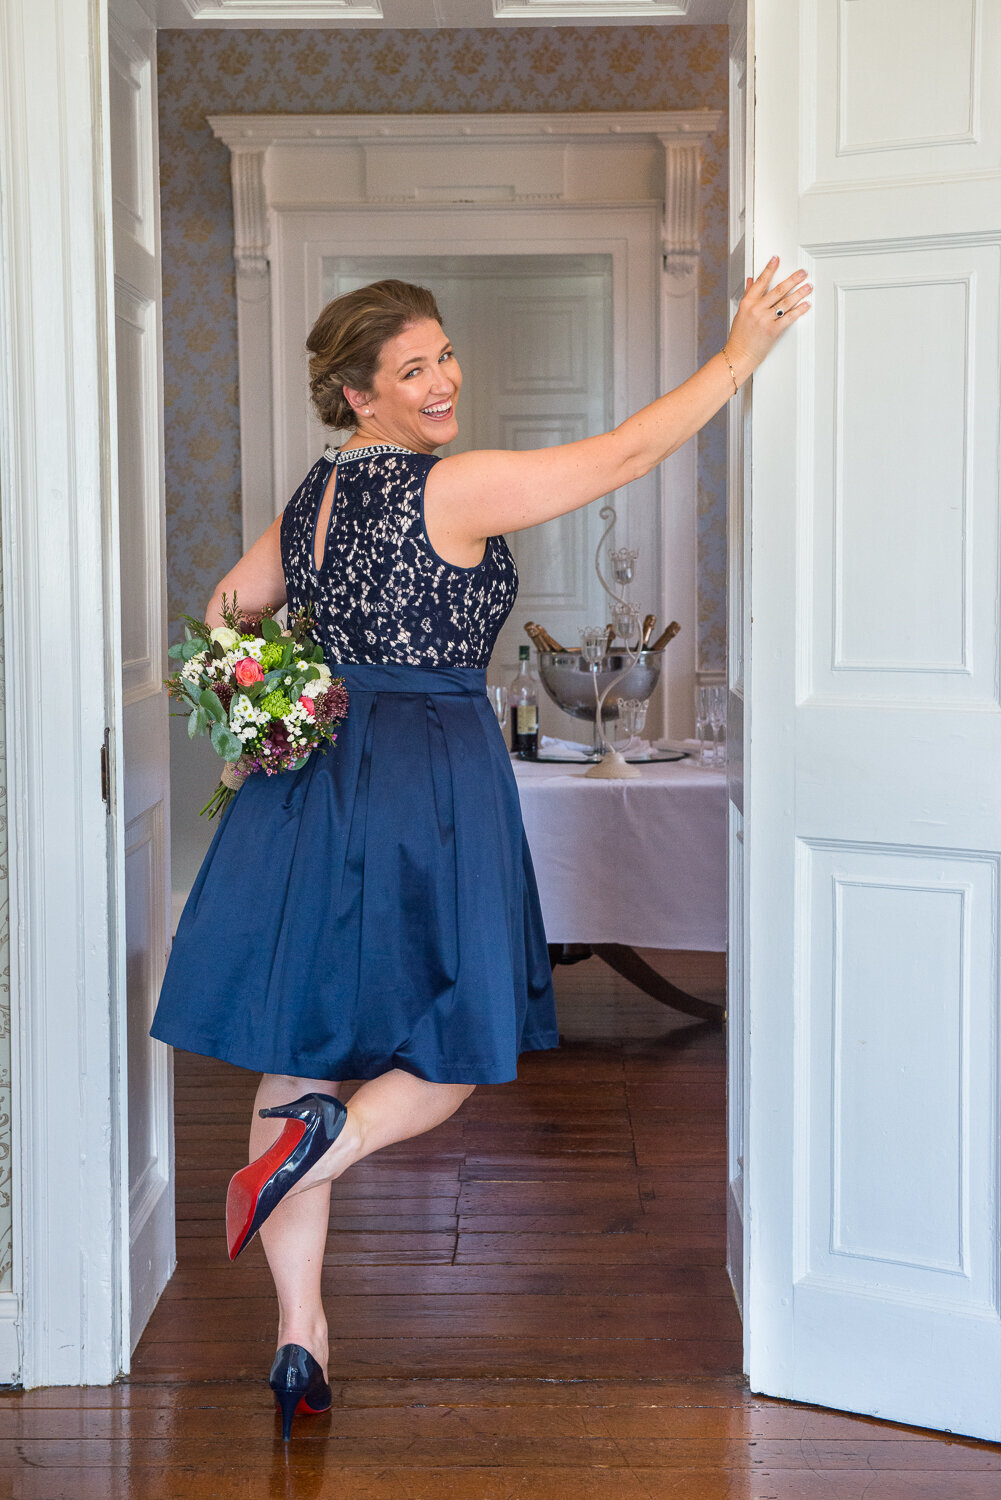 Bride in navy wedding dress wearing navy, red soled shoes